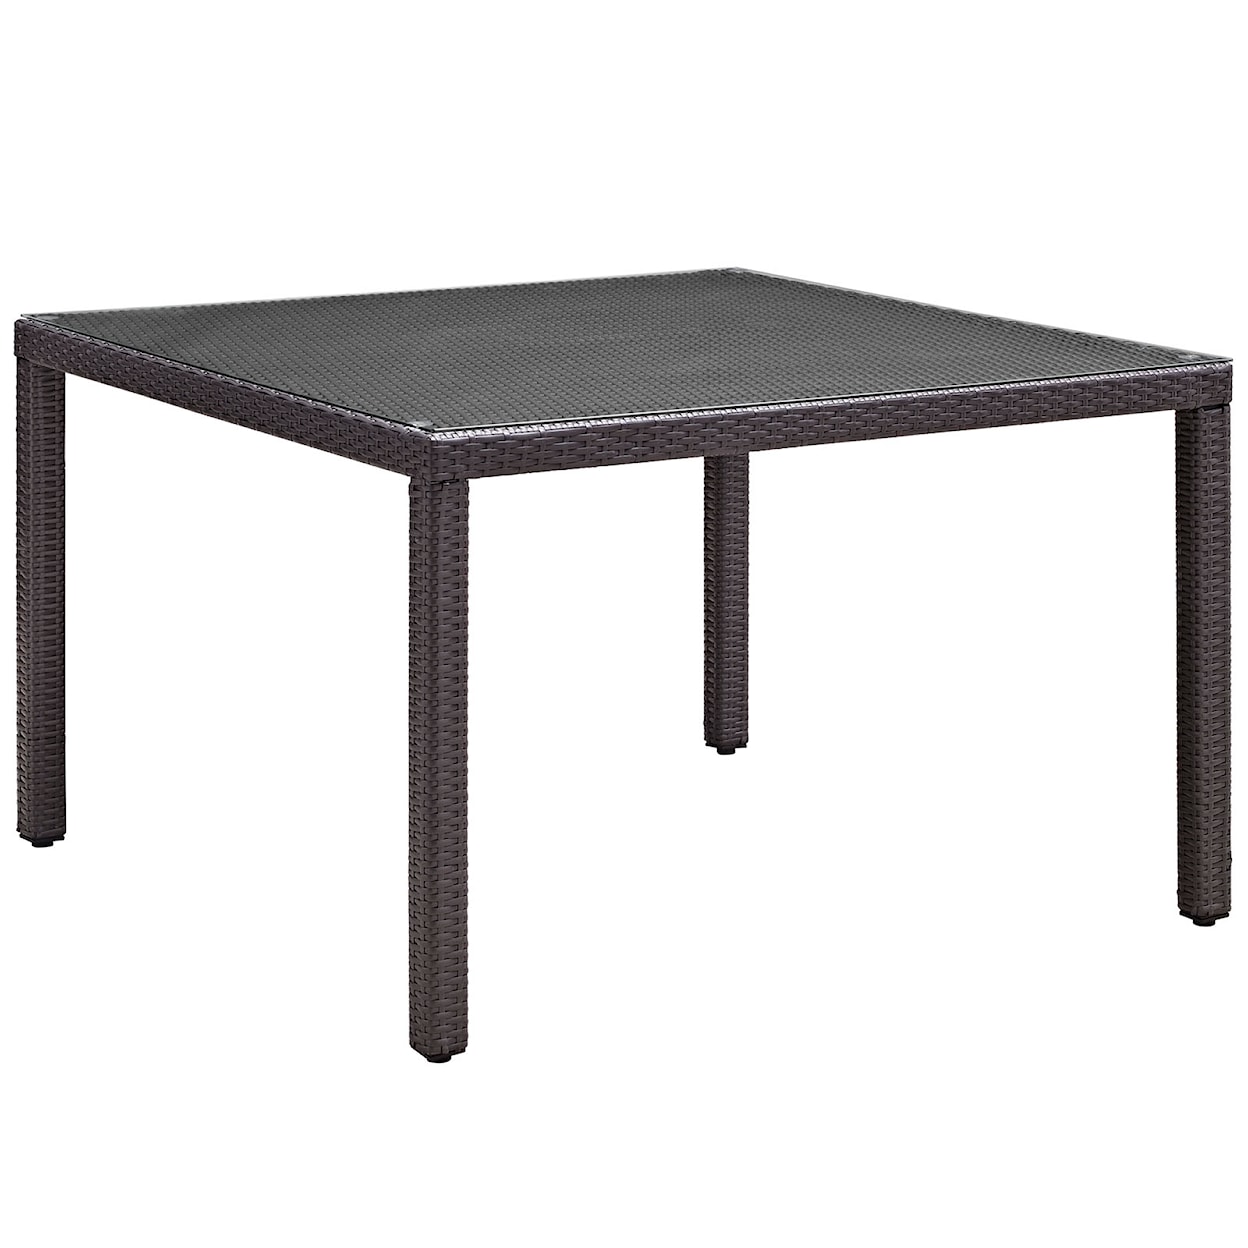 Modway Convene 47" Outdoor Glass Top Dining Table